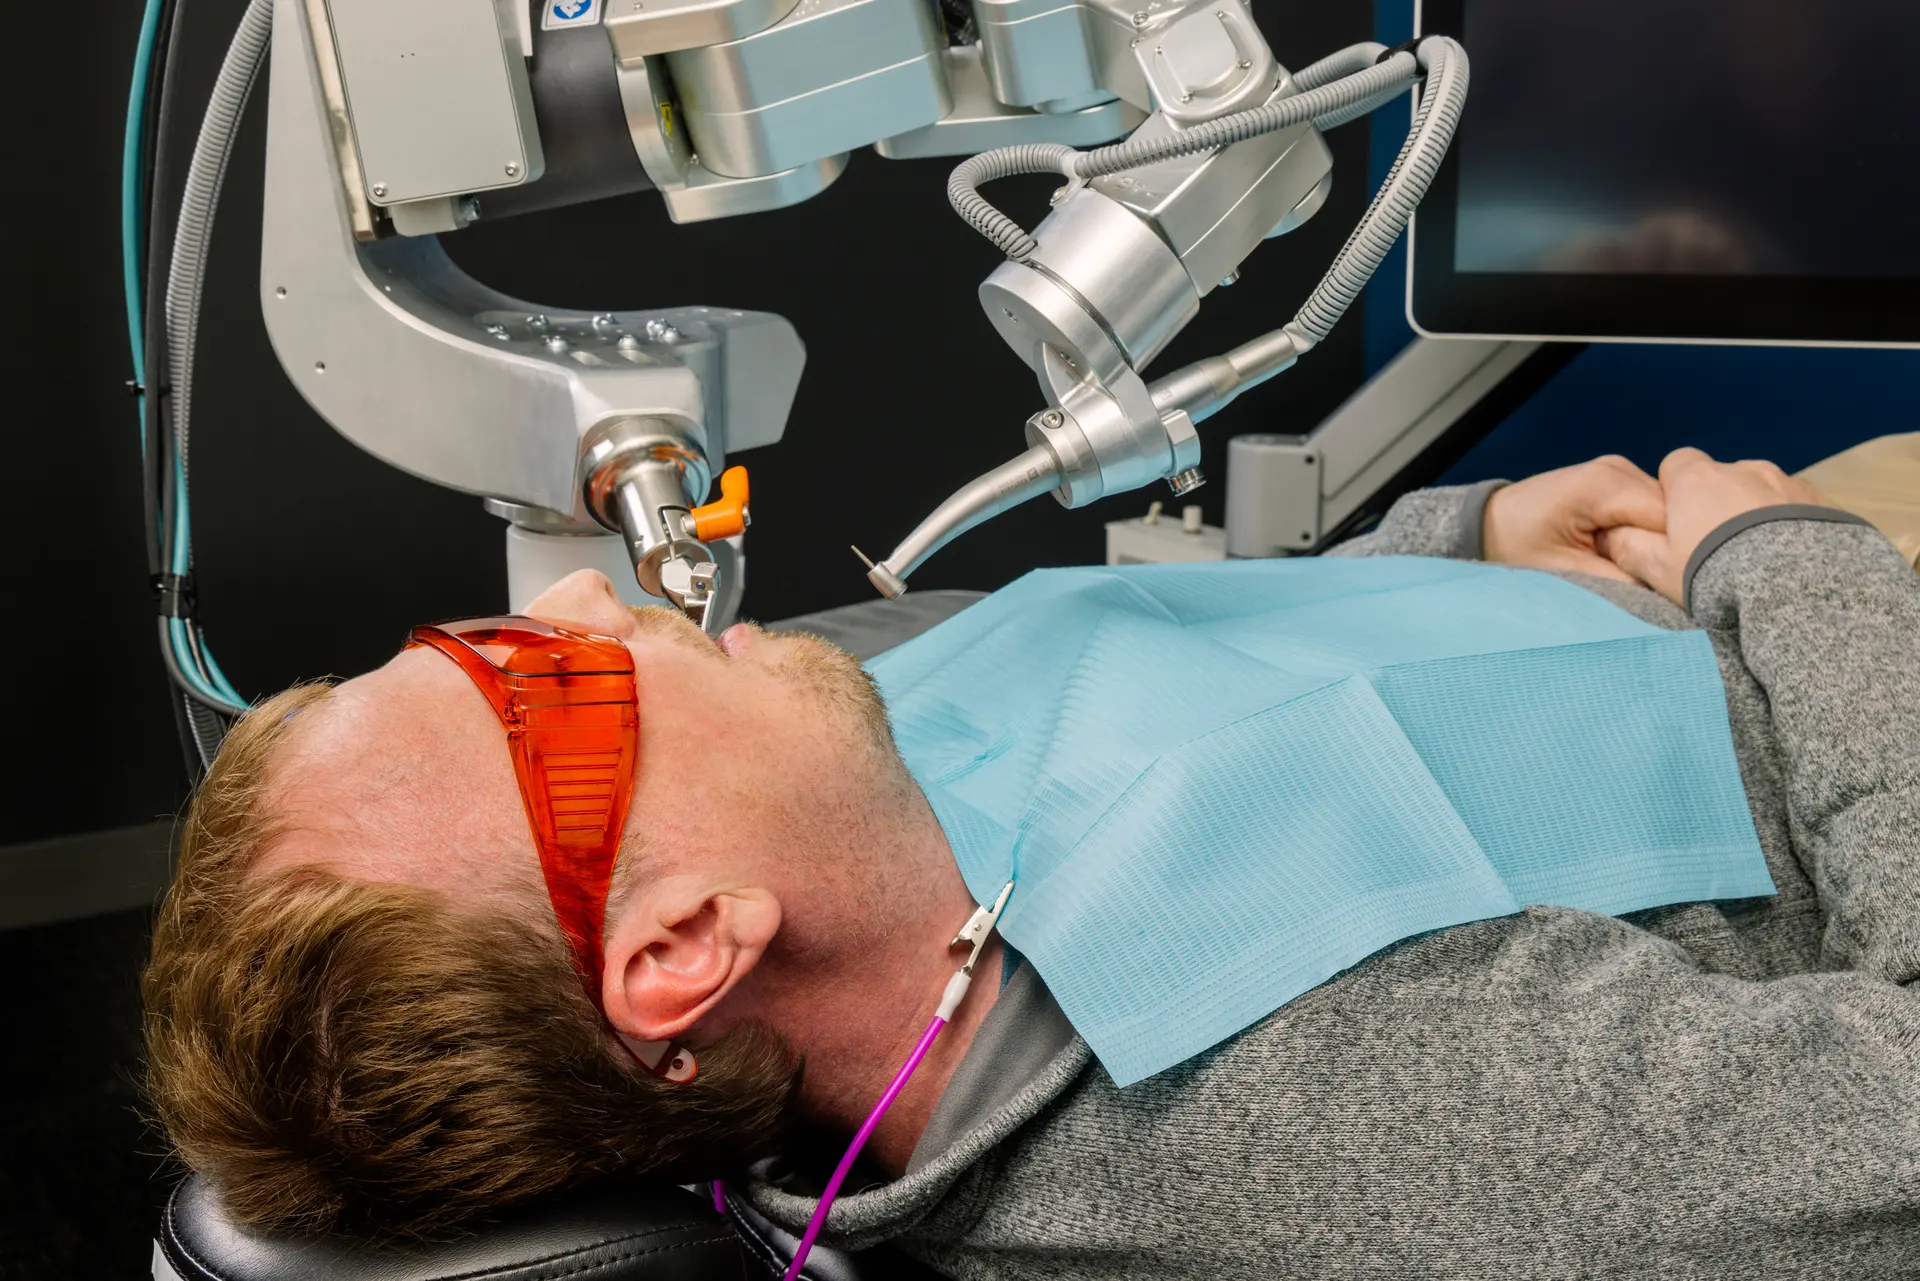 A fully-automated robotic dentist performed the world's first human procedure